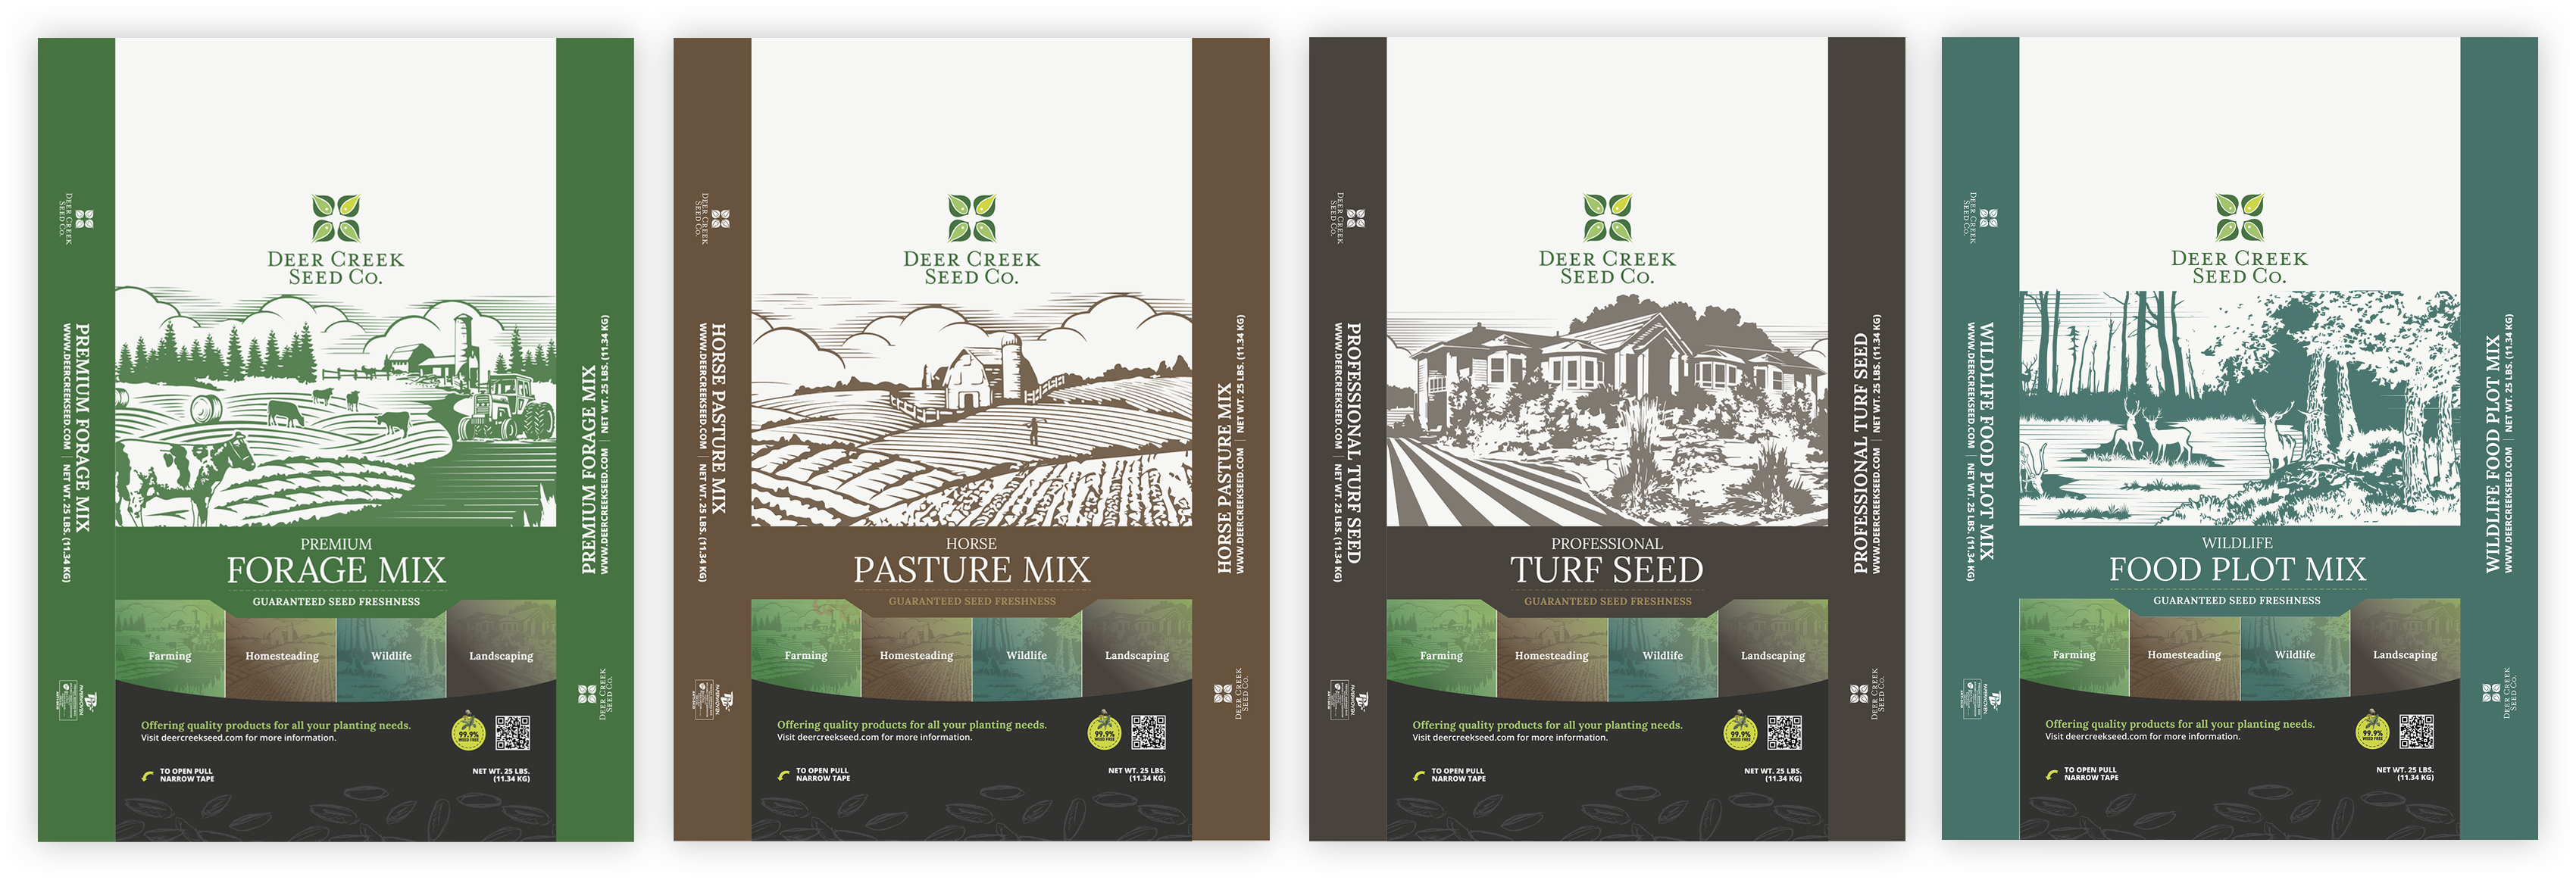 Product packaging for four product categories: Forage Mix, Pasture Mix, Turf Seed and Food Plot Mix.